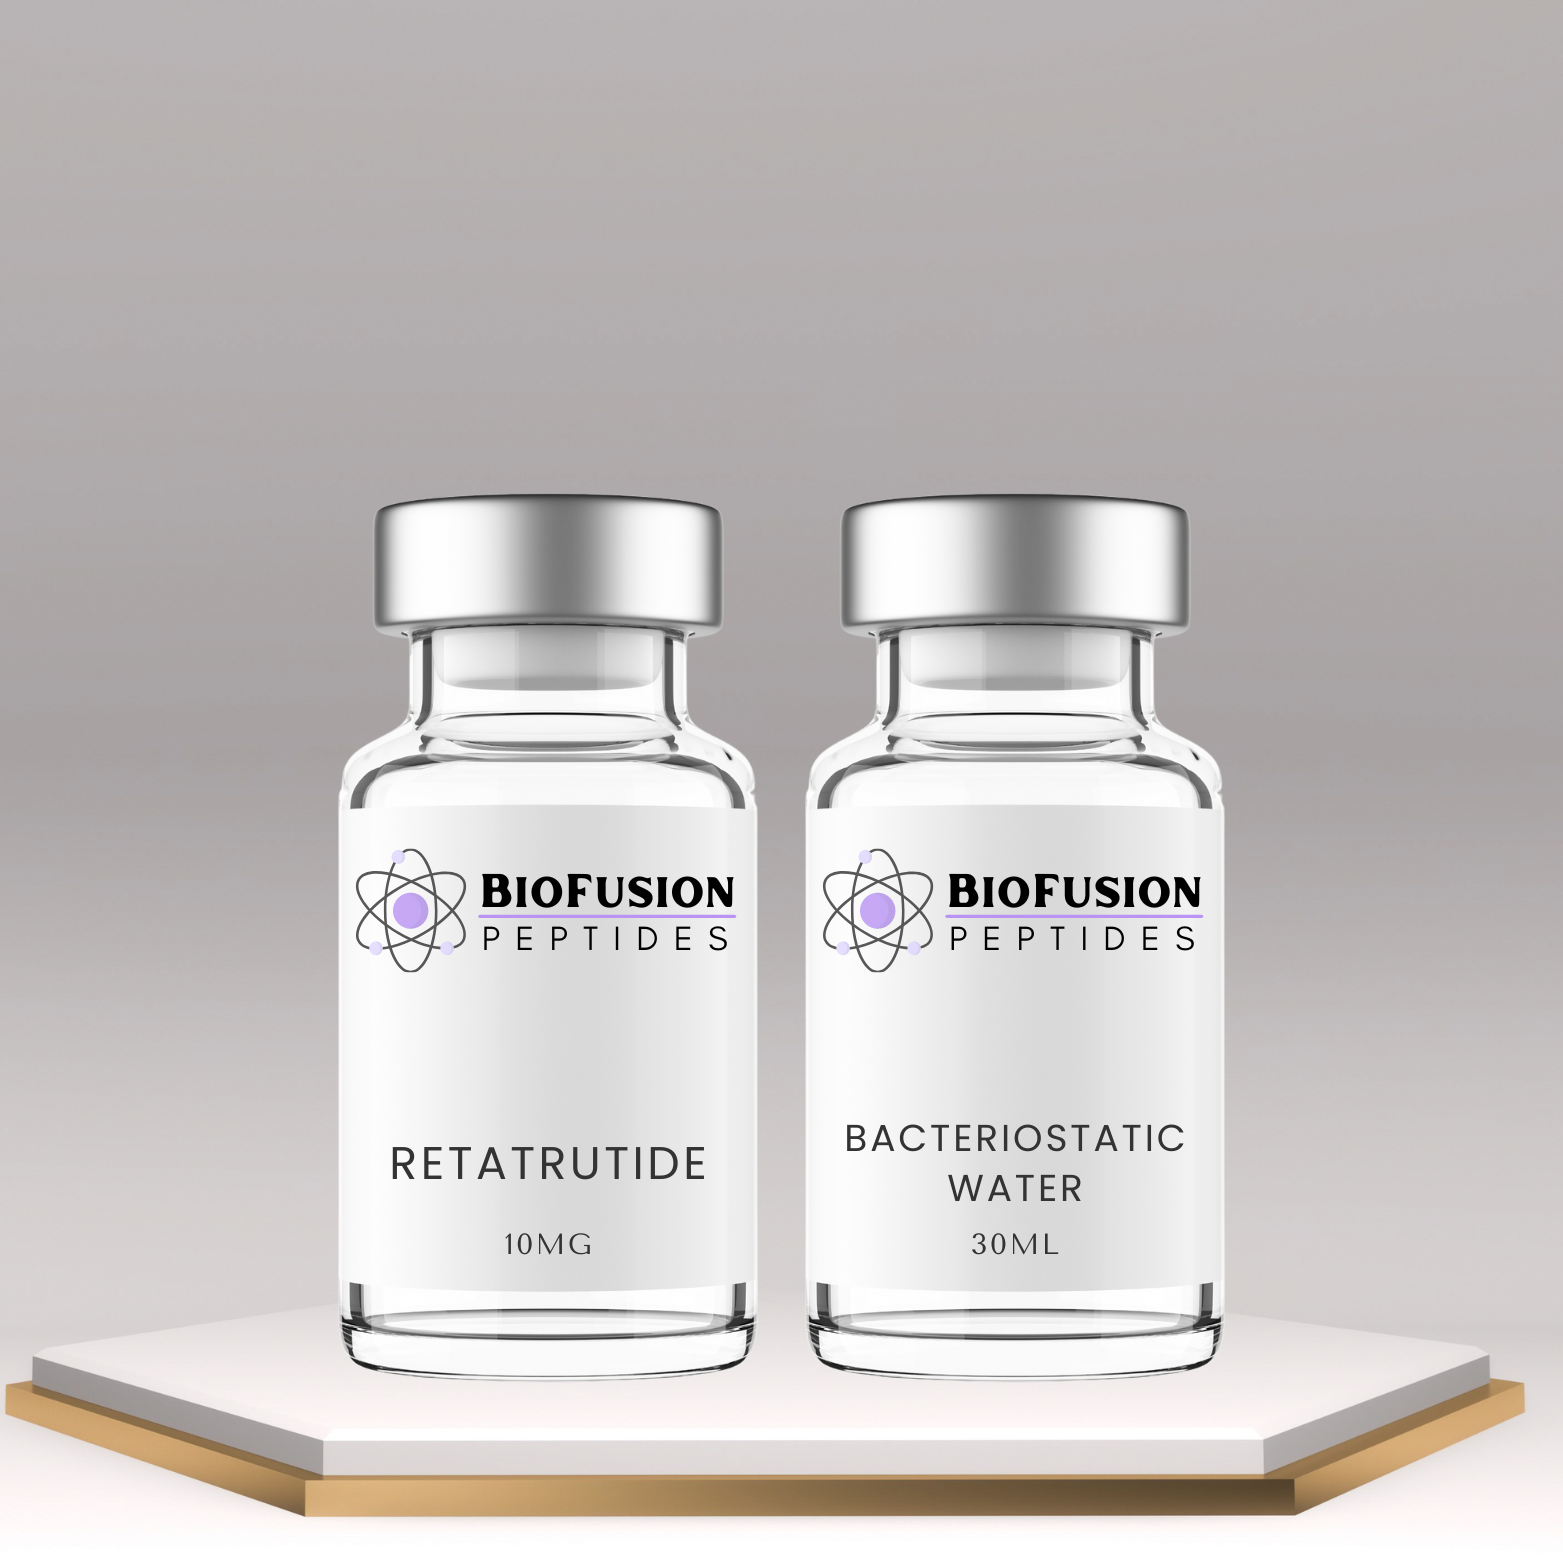 BioFusion Peptides Retatrutide kit with bacteriostatic water